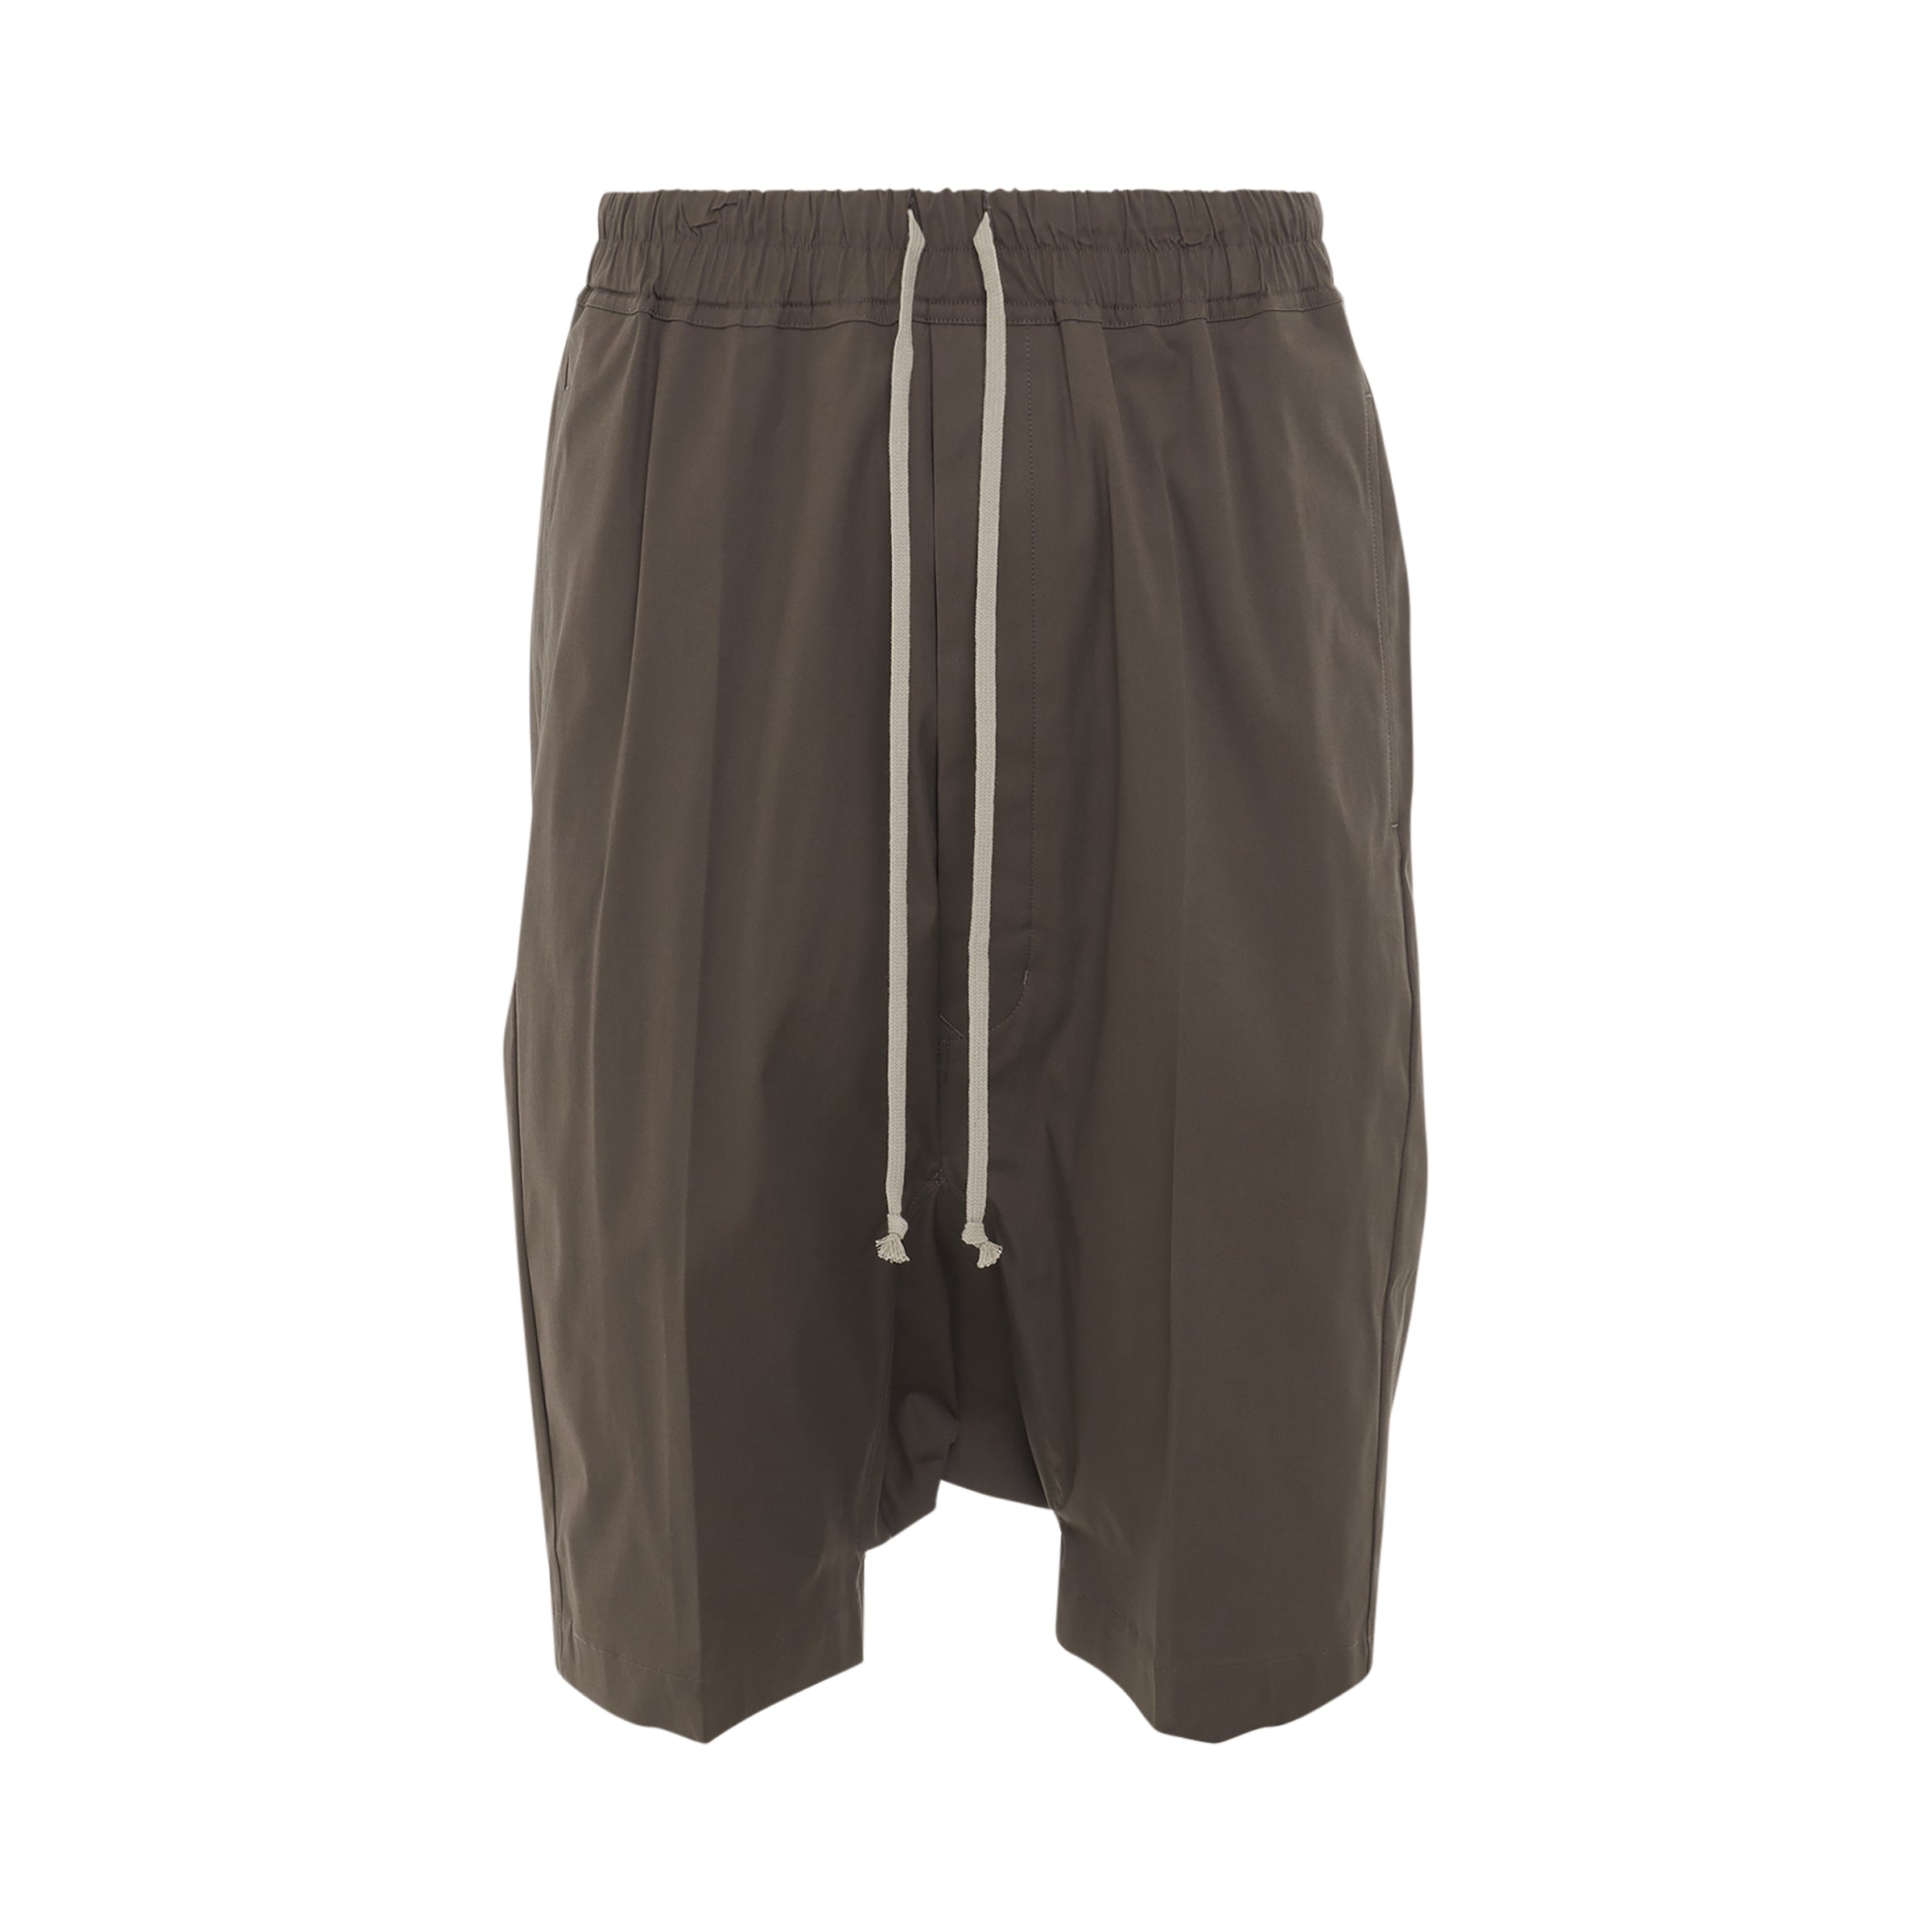 Rick Owens Ricks Pods Shorts in Dust | REVERSIBLE